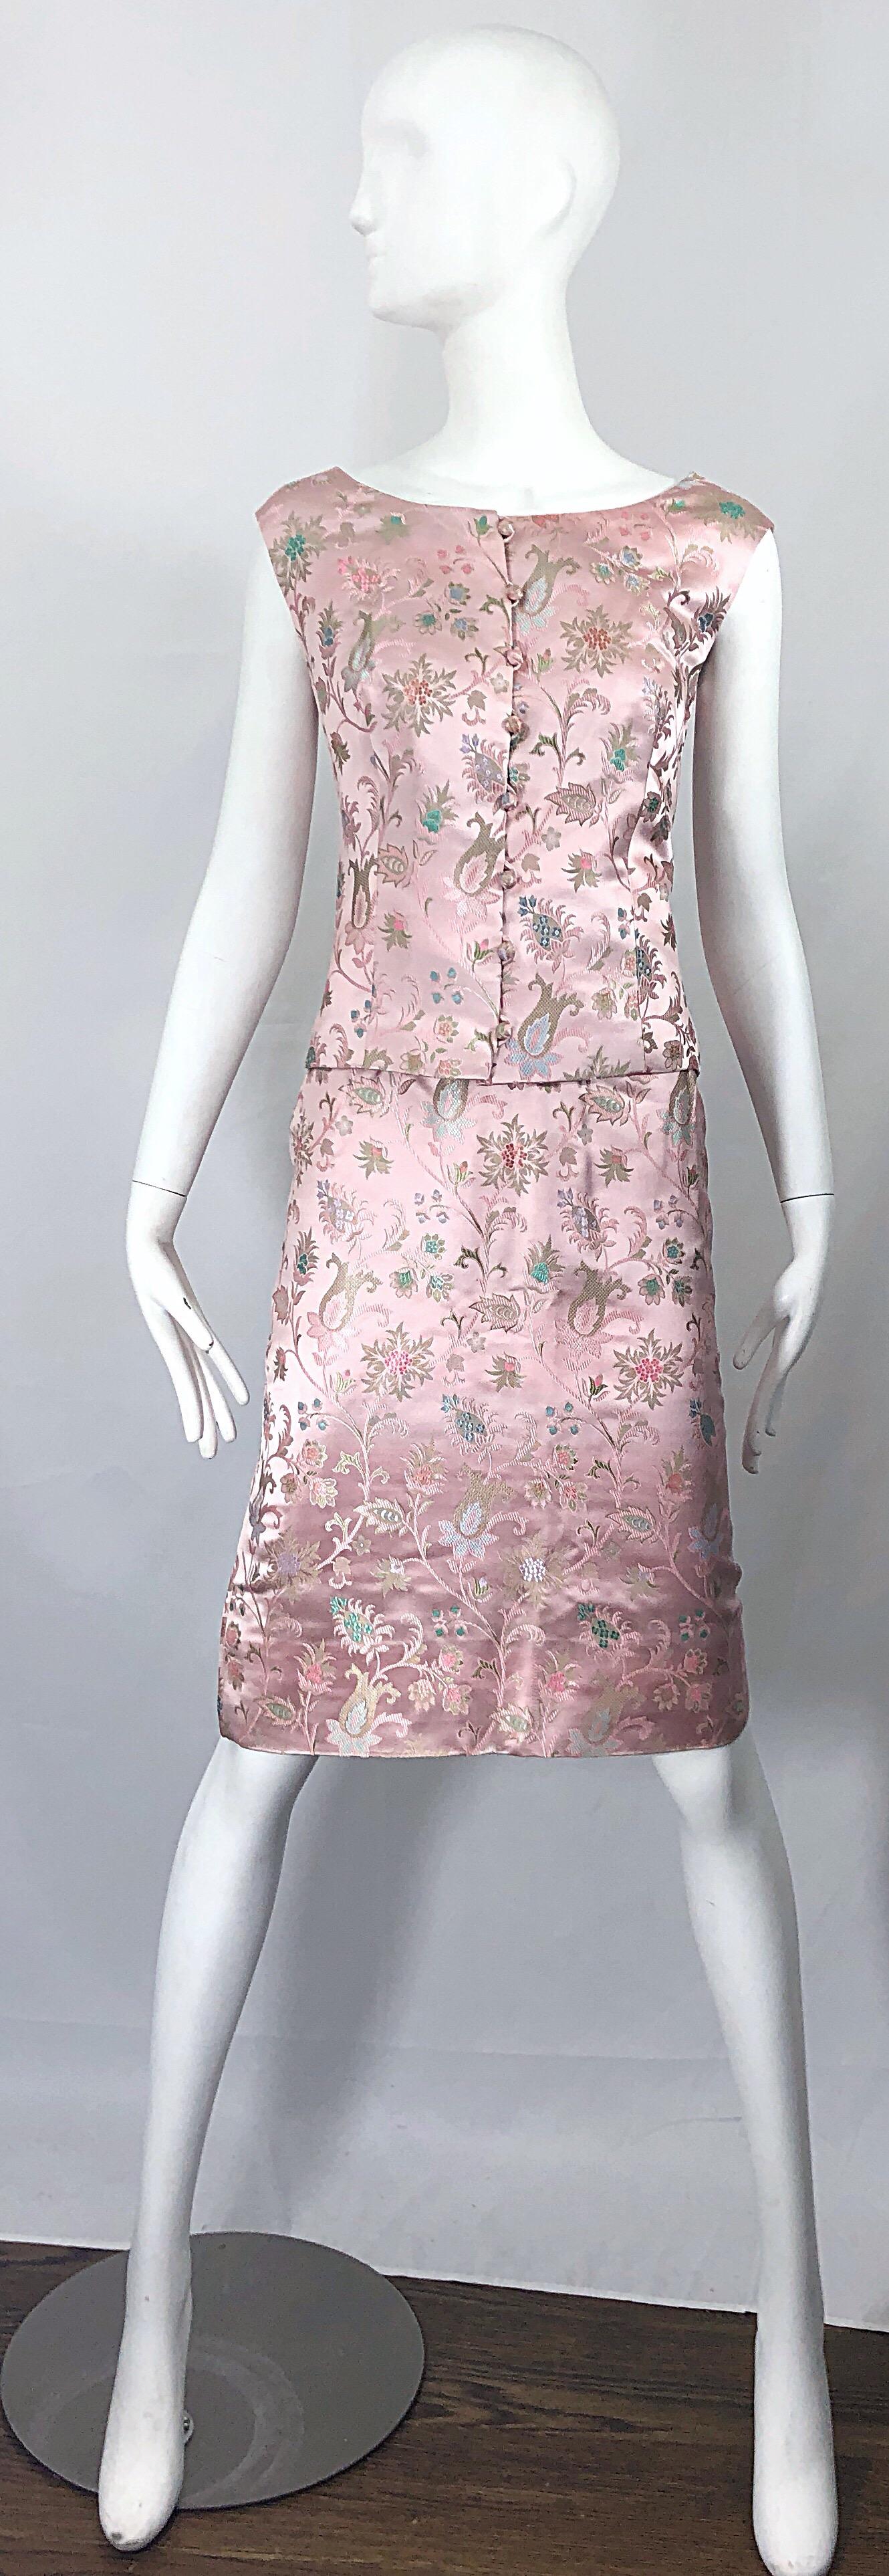 Utterly chic vintage 60s DYNASTY 3 piece light pink silk dress ensemble! The most beautiful light pink silk with intricate embrodiery in blues, greens, pinks and lavender purple throughout. 
Features a sleeveless top that buttons up the front.